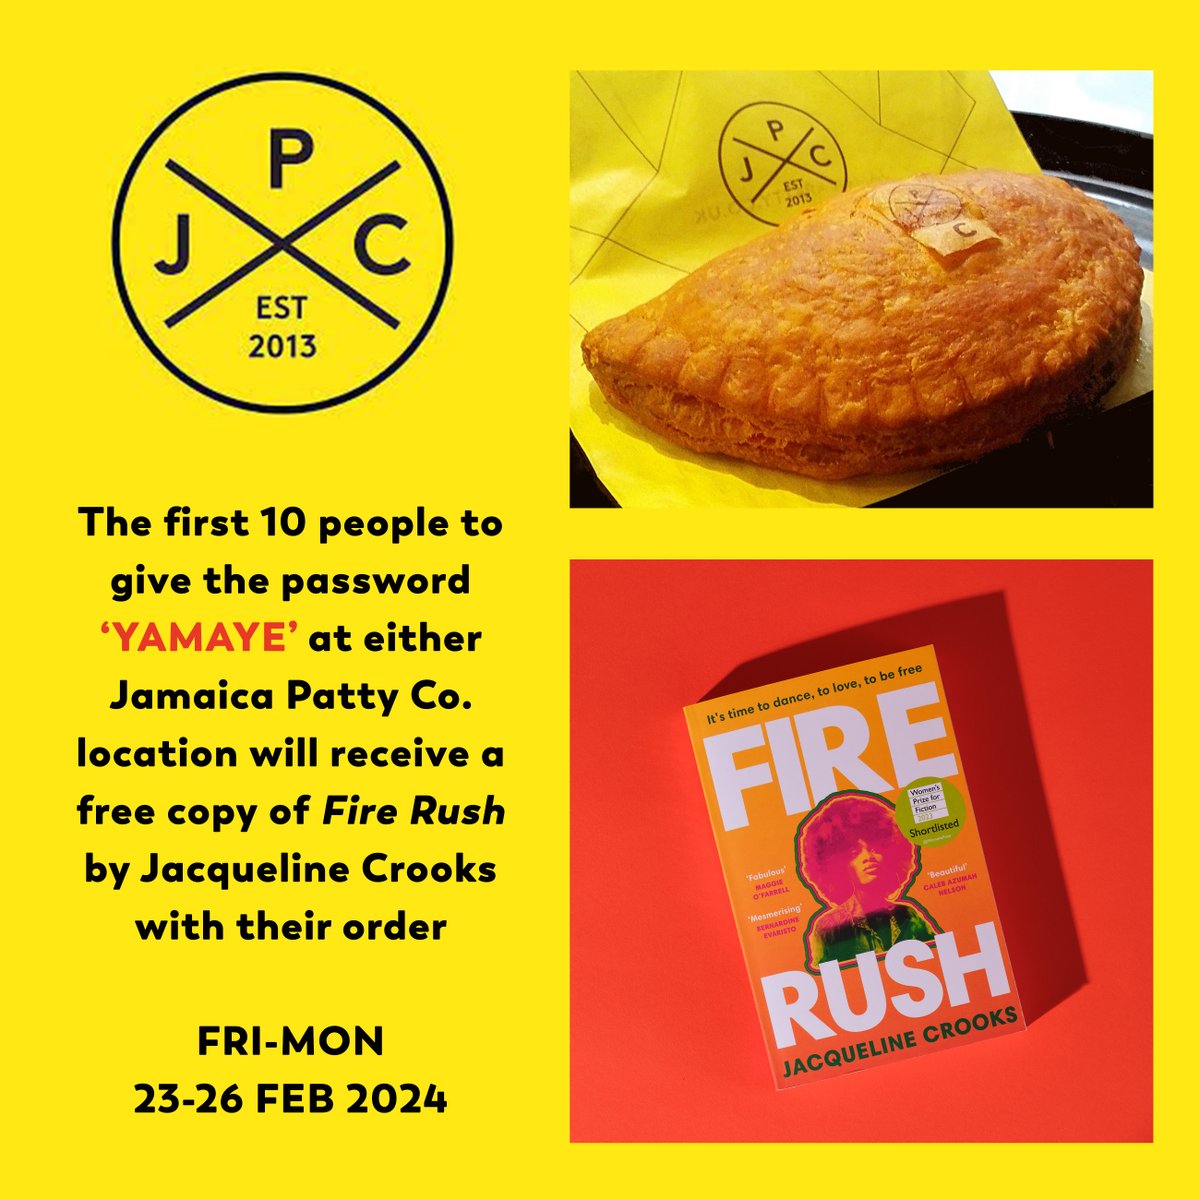 JAMAICA PATTY CO x FIRE RUSH We've teamed up with @JamaicaPattyCo for a book + patty promotion from 23 - 26 Feb at both their shops. If you're in the area, pop in + order for the chance to get a free copy of @luidas' @womensprize shortlisted FIRE RUSH! (Quote 'password': YAMAYE)